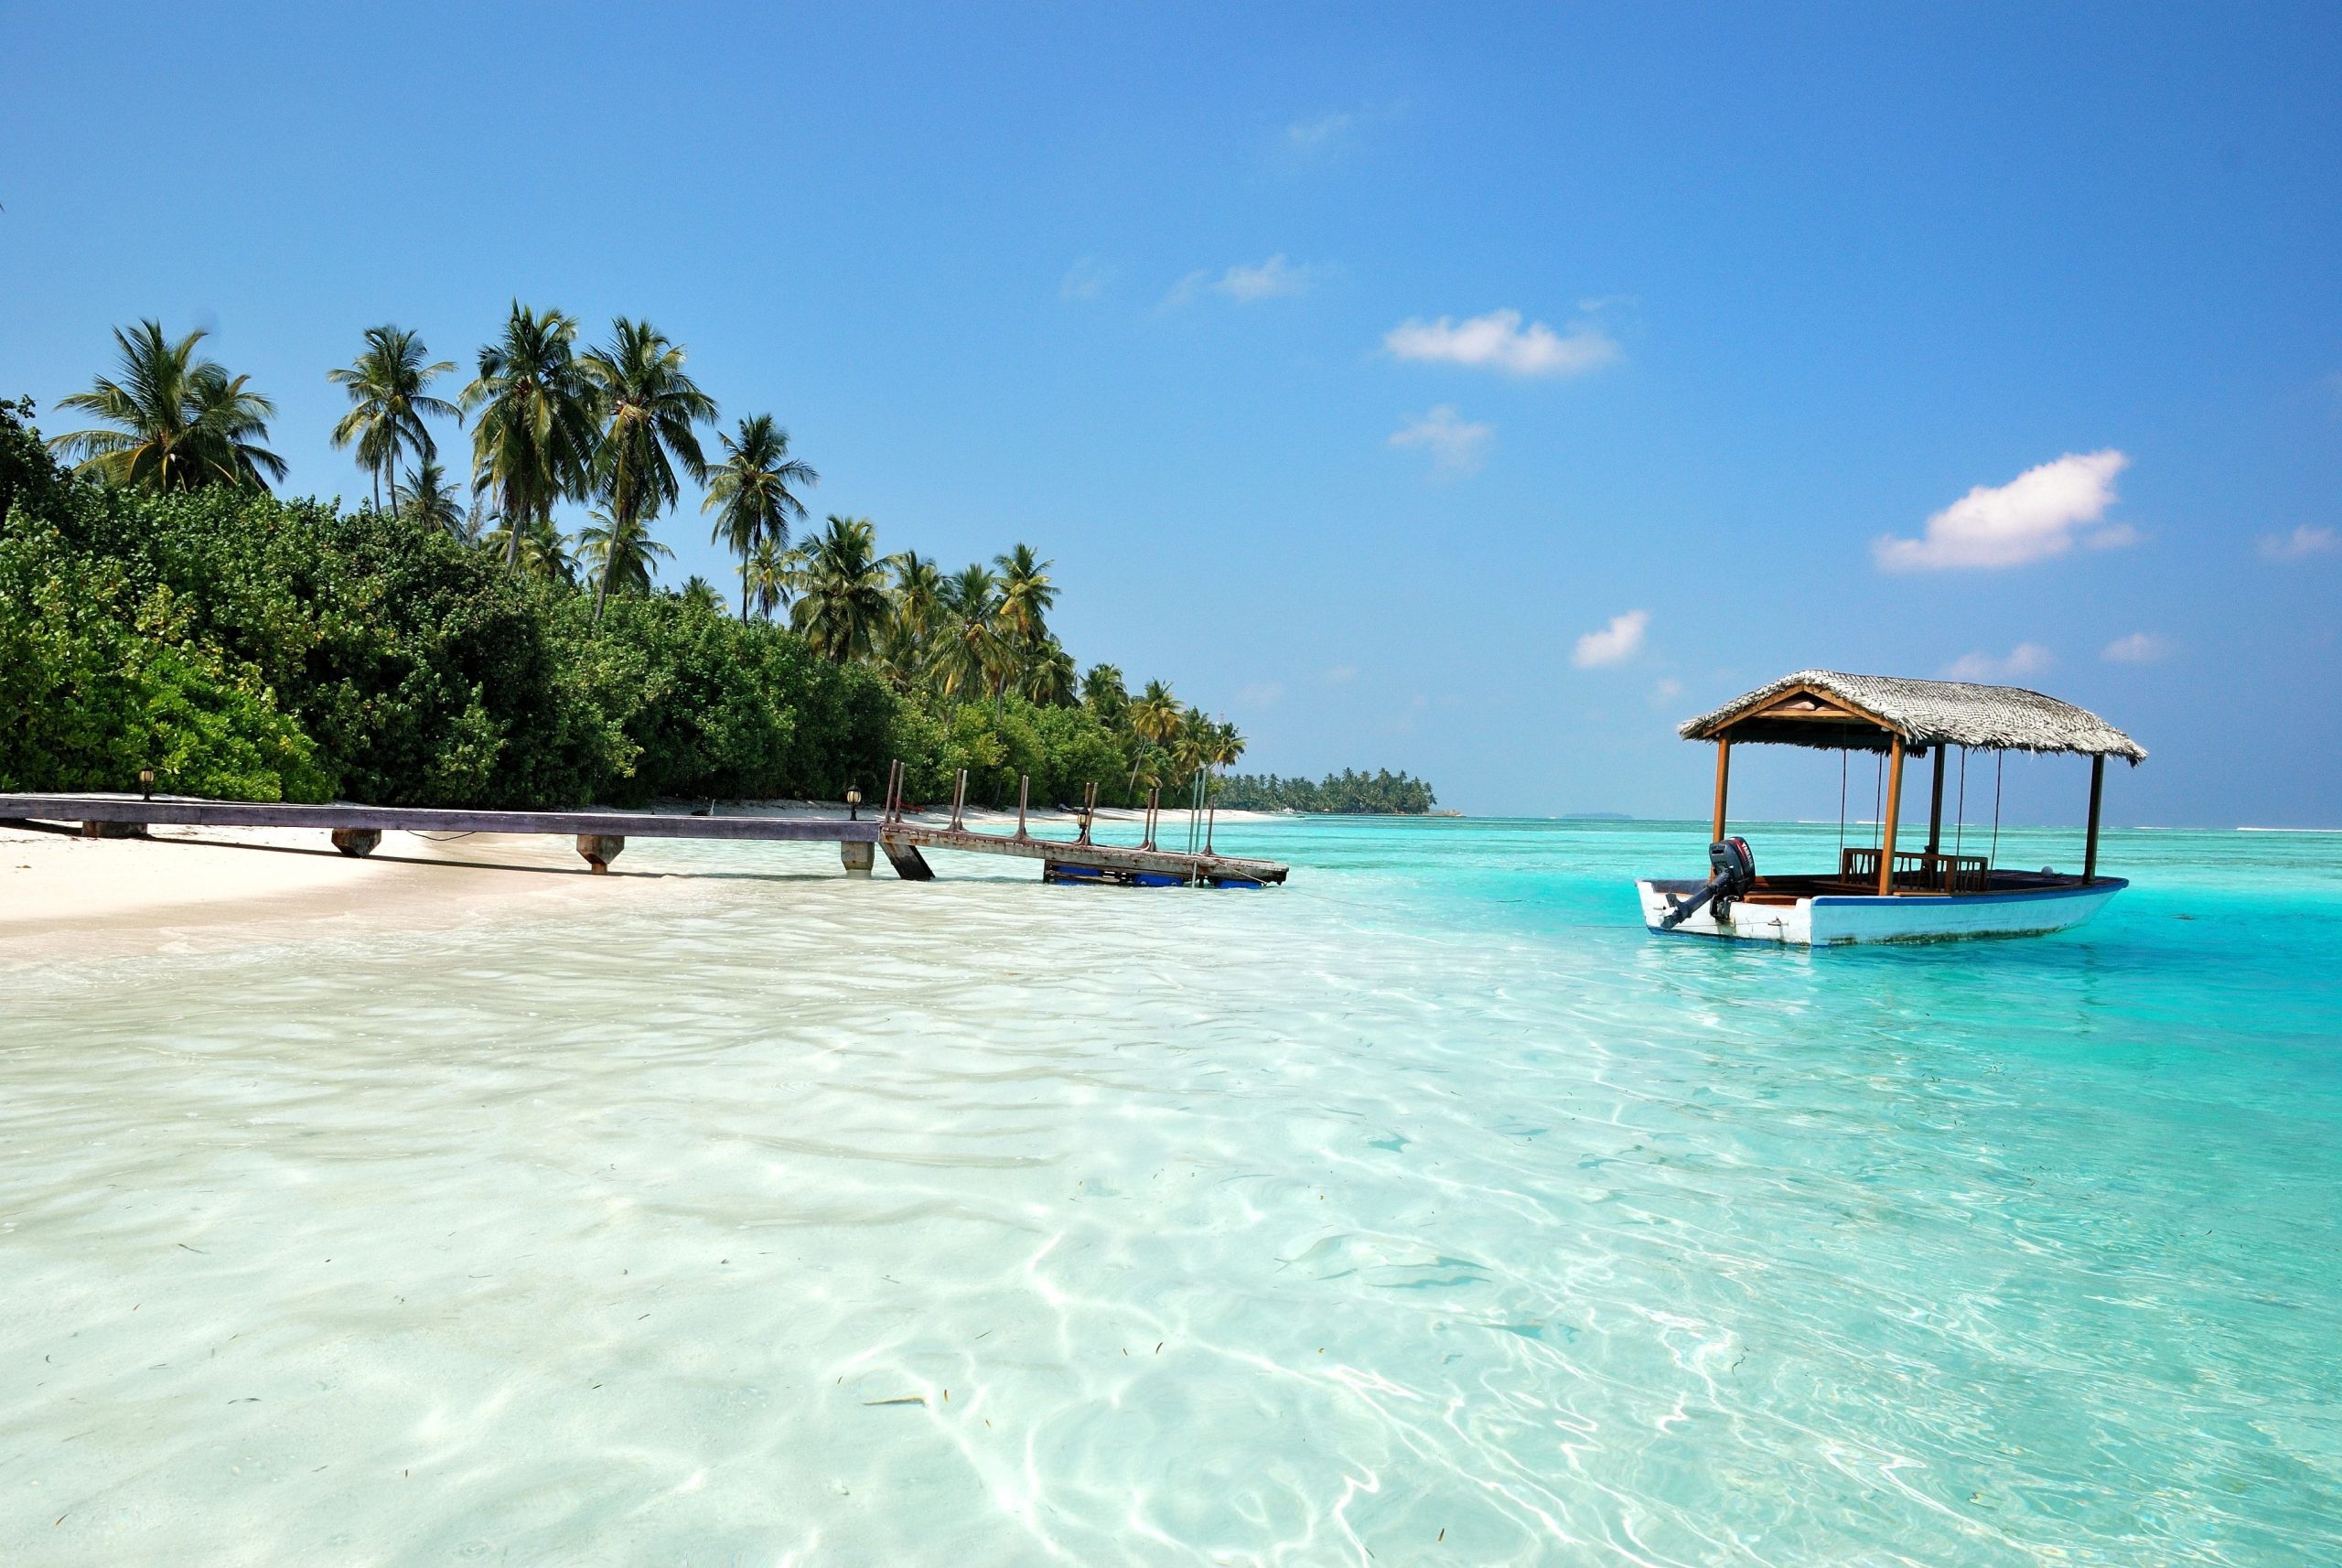 Maldives reopens for tourists in push to be a ‘virus safe’ destination